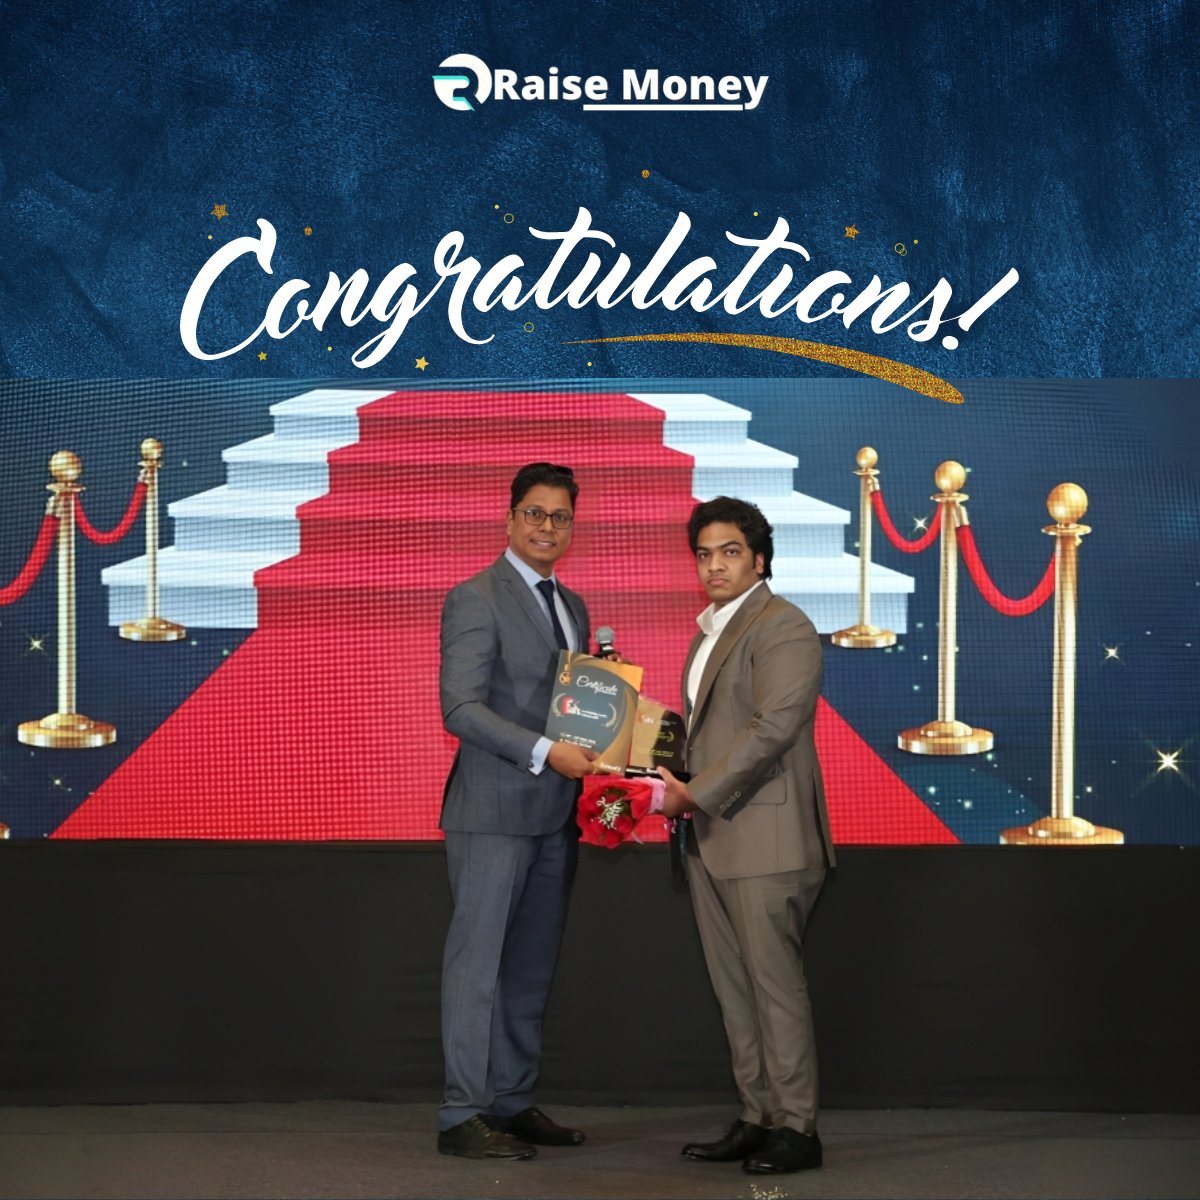 Anirudh Pratap Singh shines as Director of the Year in Technical Excellence, honored at the India Banking Summit & Awards 2023! 

Congratulations on this well-deserved recognition at the event organized by Synnex® Group

#bankinginnovation #awards2023 #networking #mumbaievents